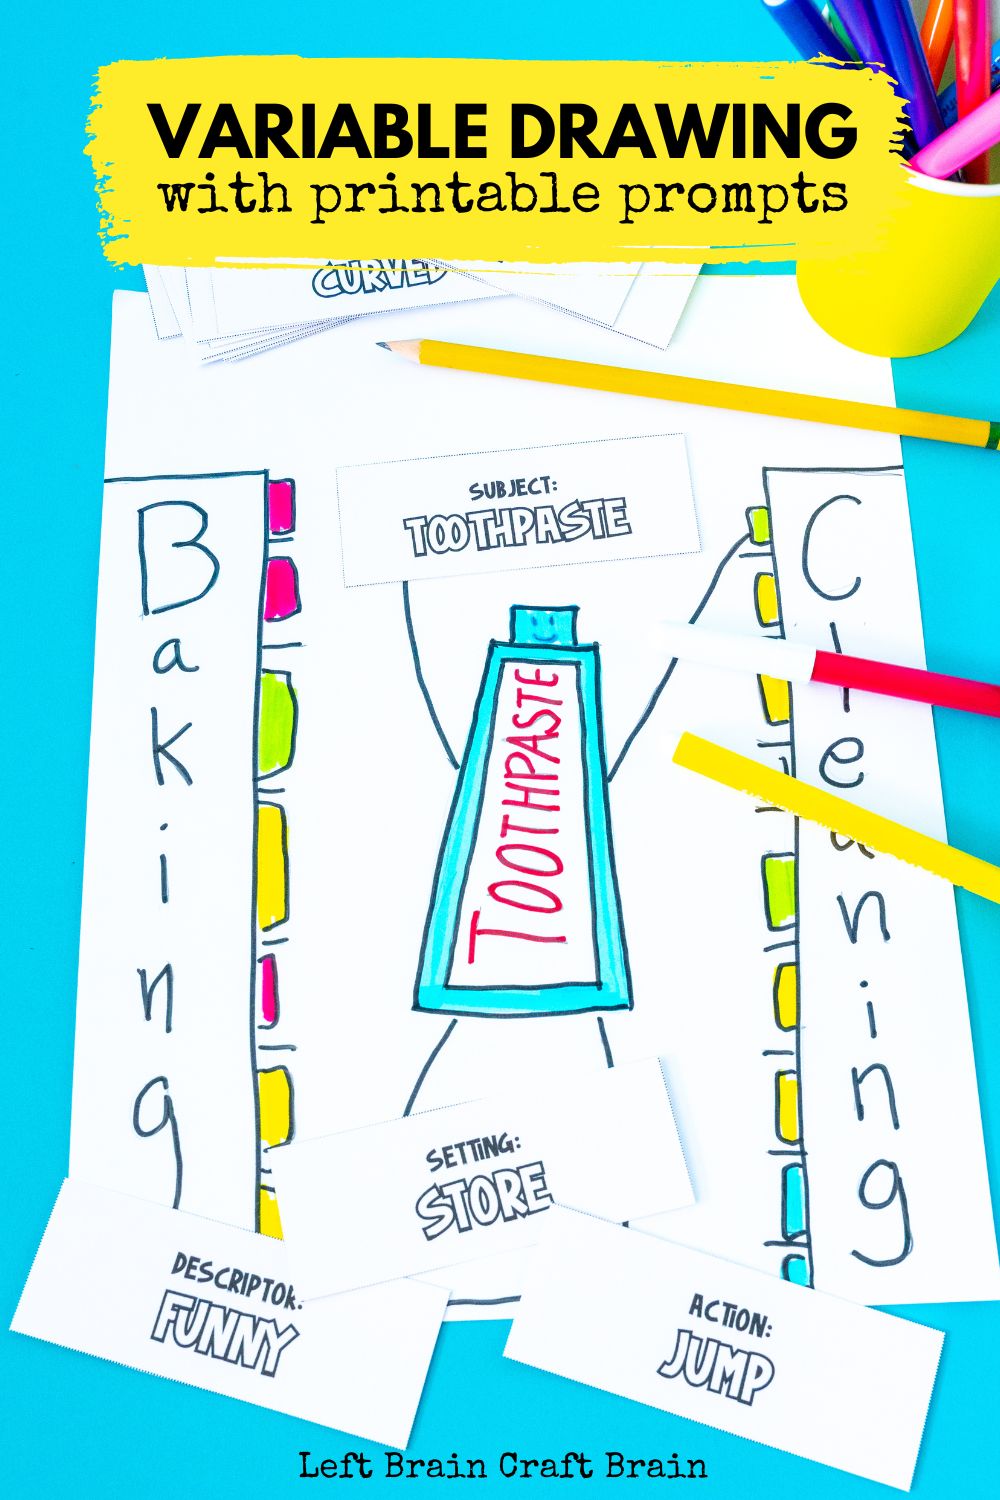 The kids will love drawing something unique with Variable Drawing. The free printable drawing prompts make it easy.